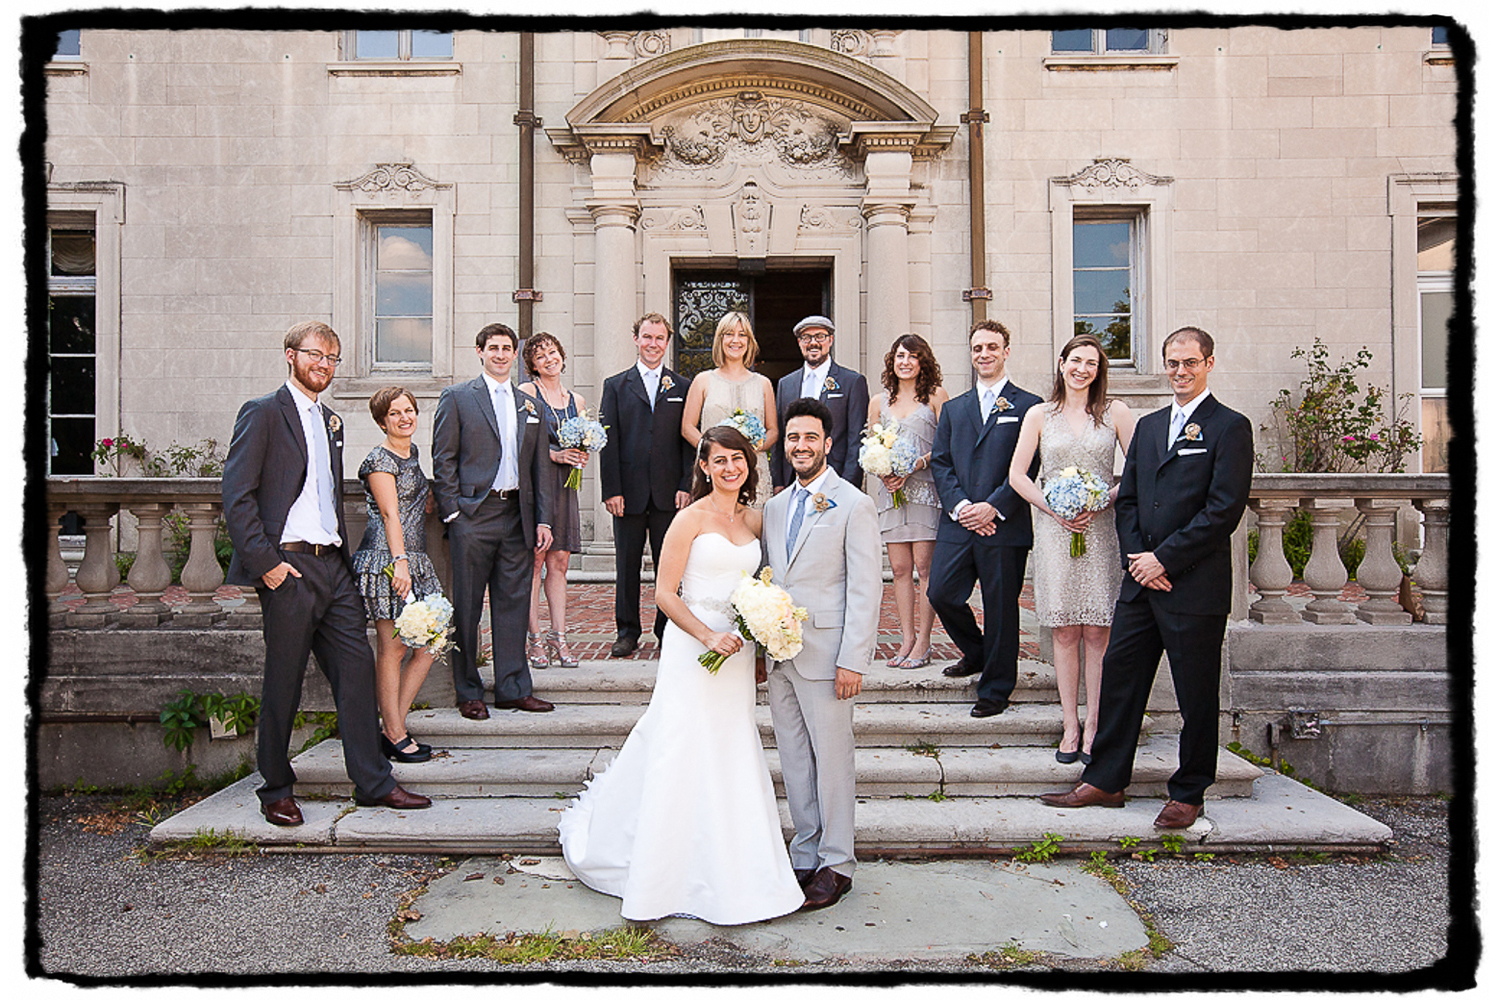 Tracey & Ben and their bridesmaids and groomsmen on the front stairs outside of Alder Manor in Westchester NY.